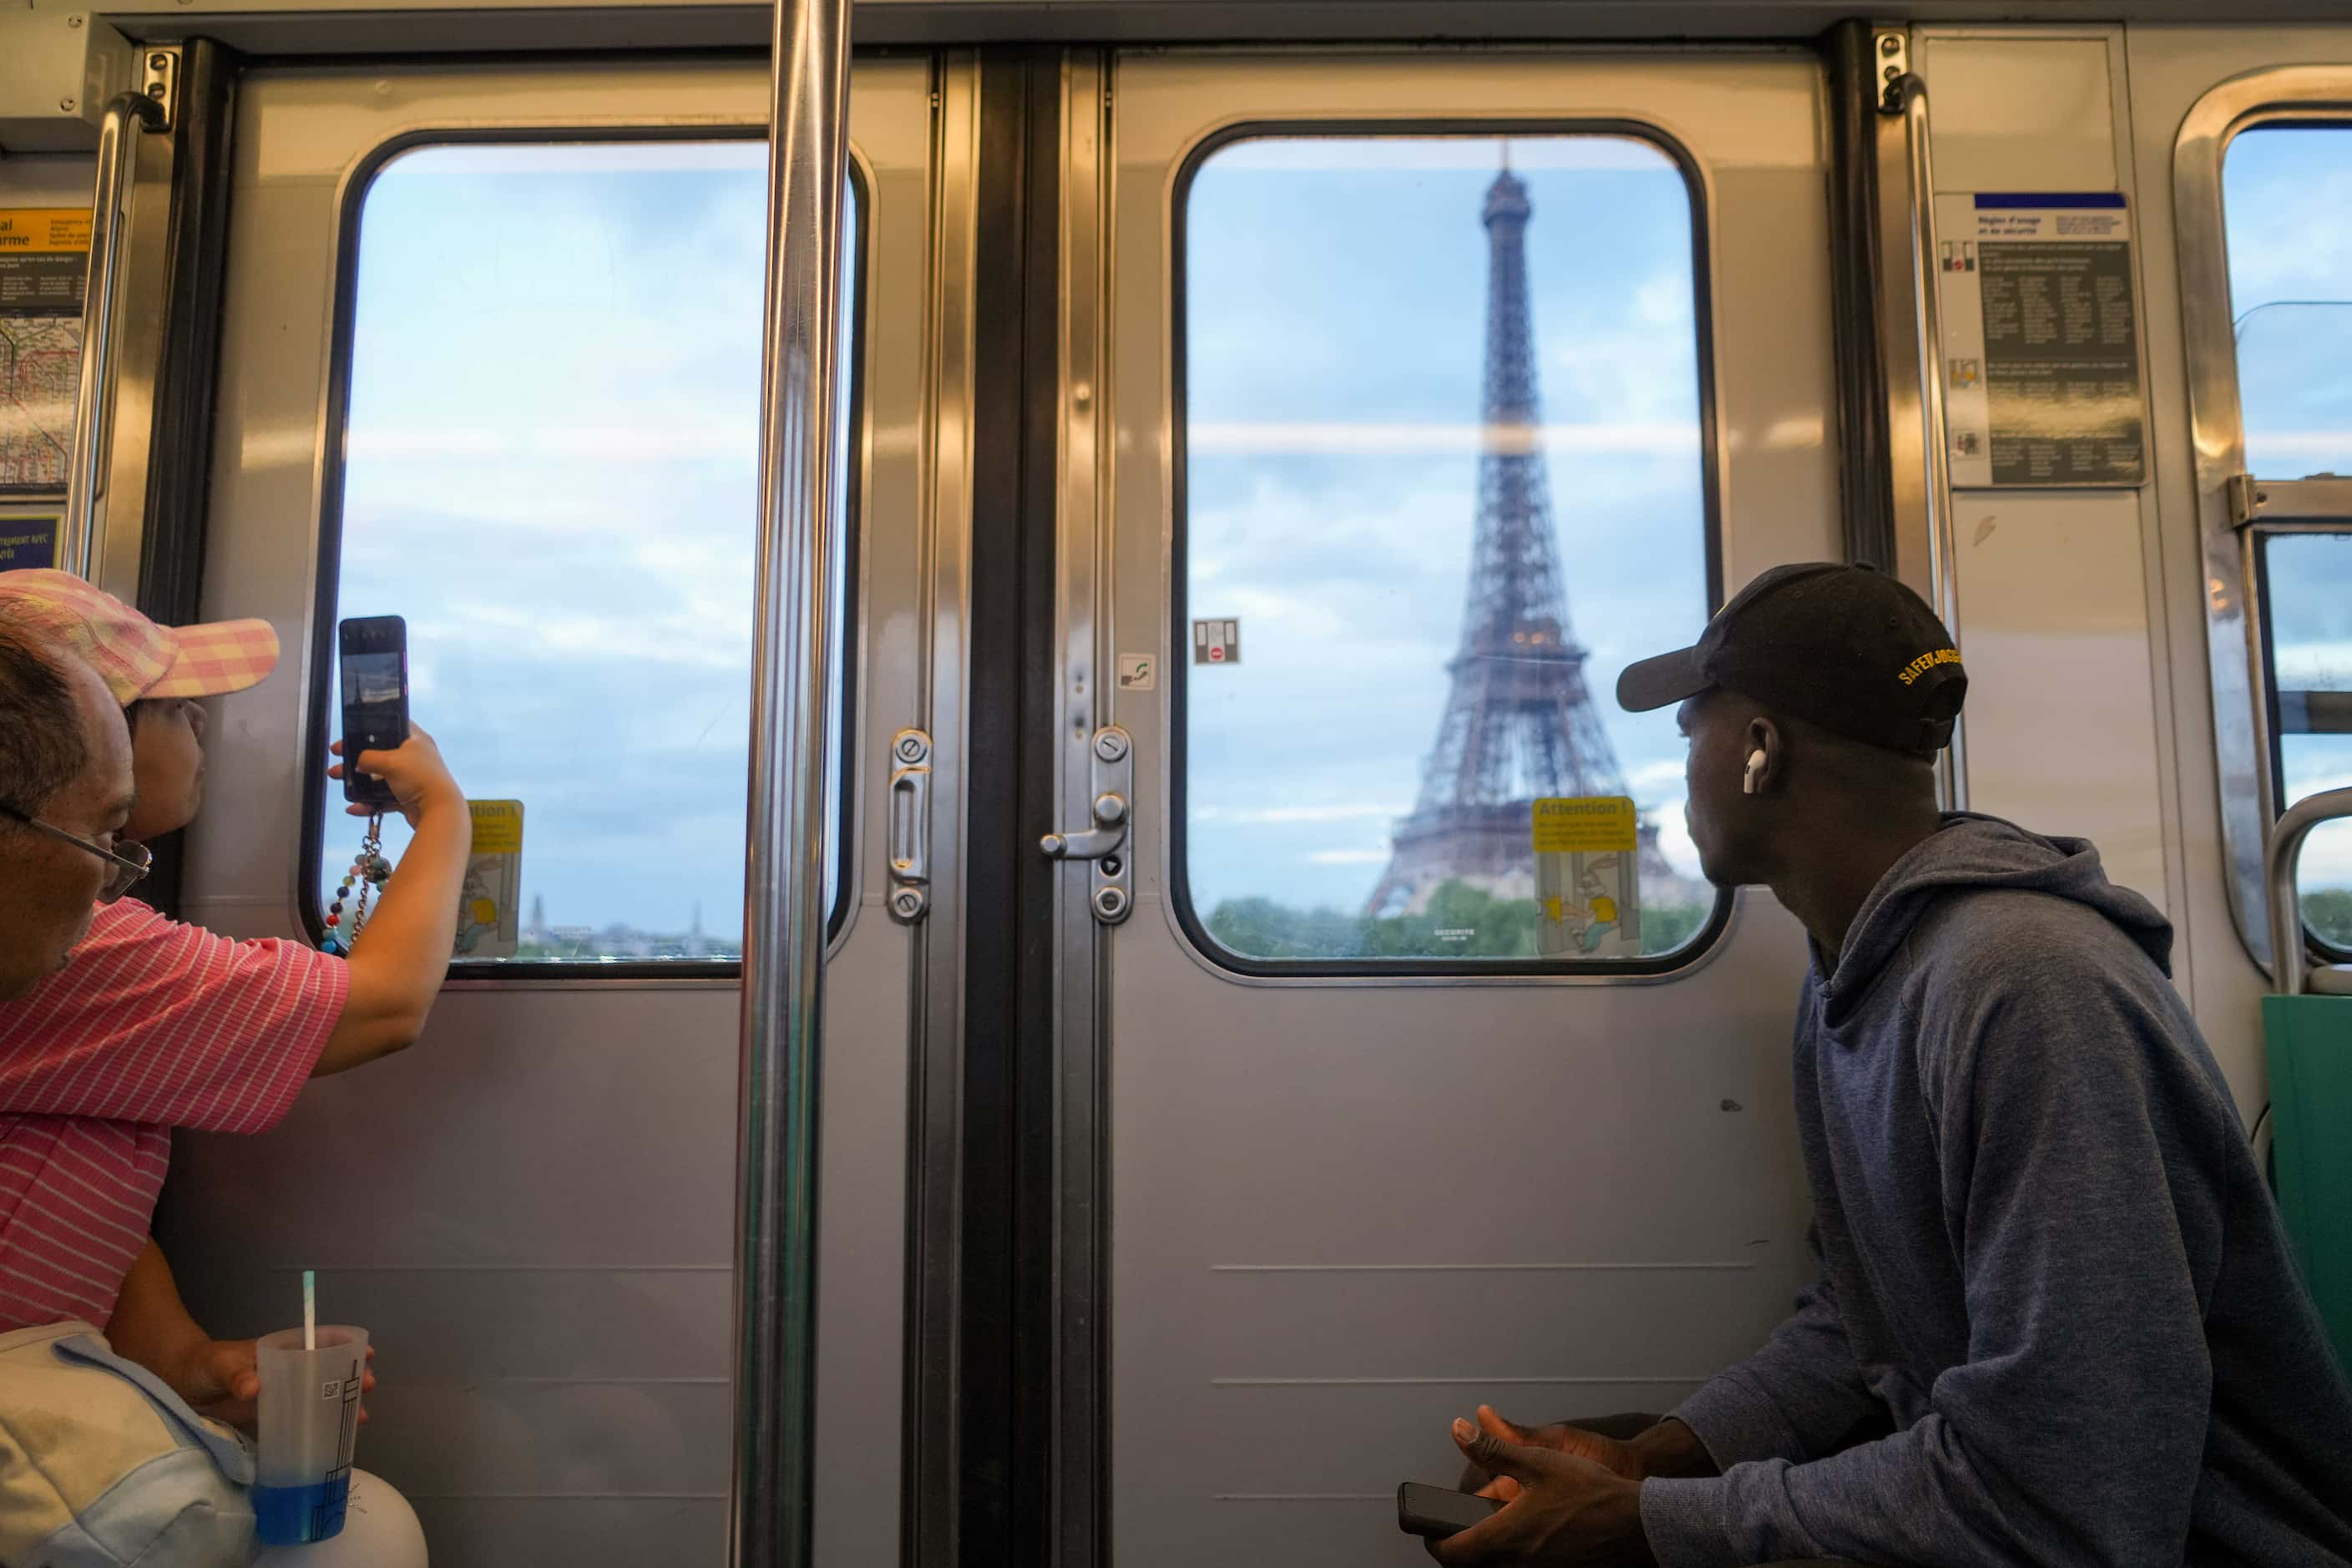 Riders look out toward the Eiffel Tower from a metro train ahead of the 2024 Summer Olympics...